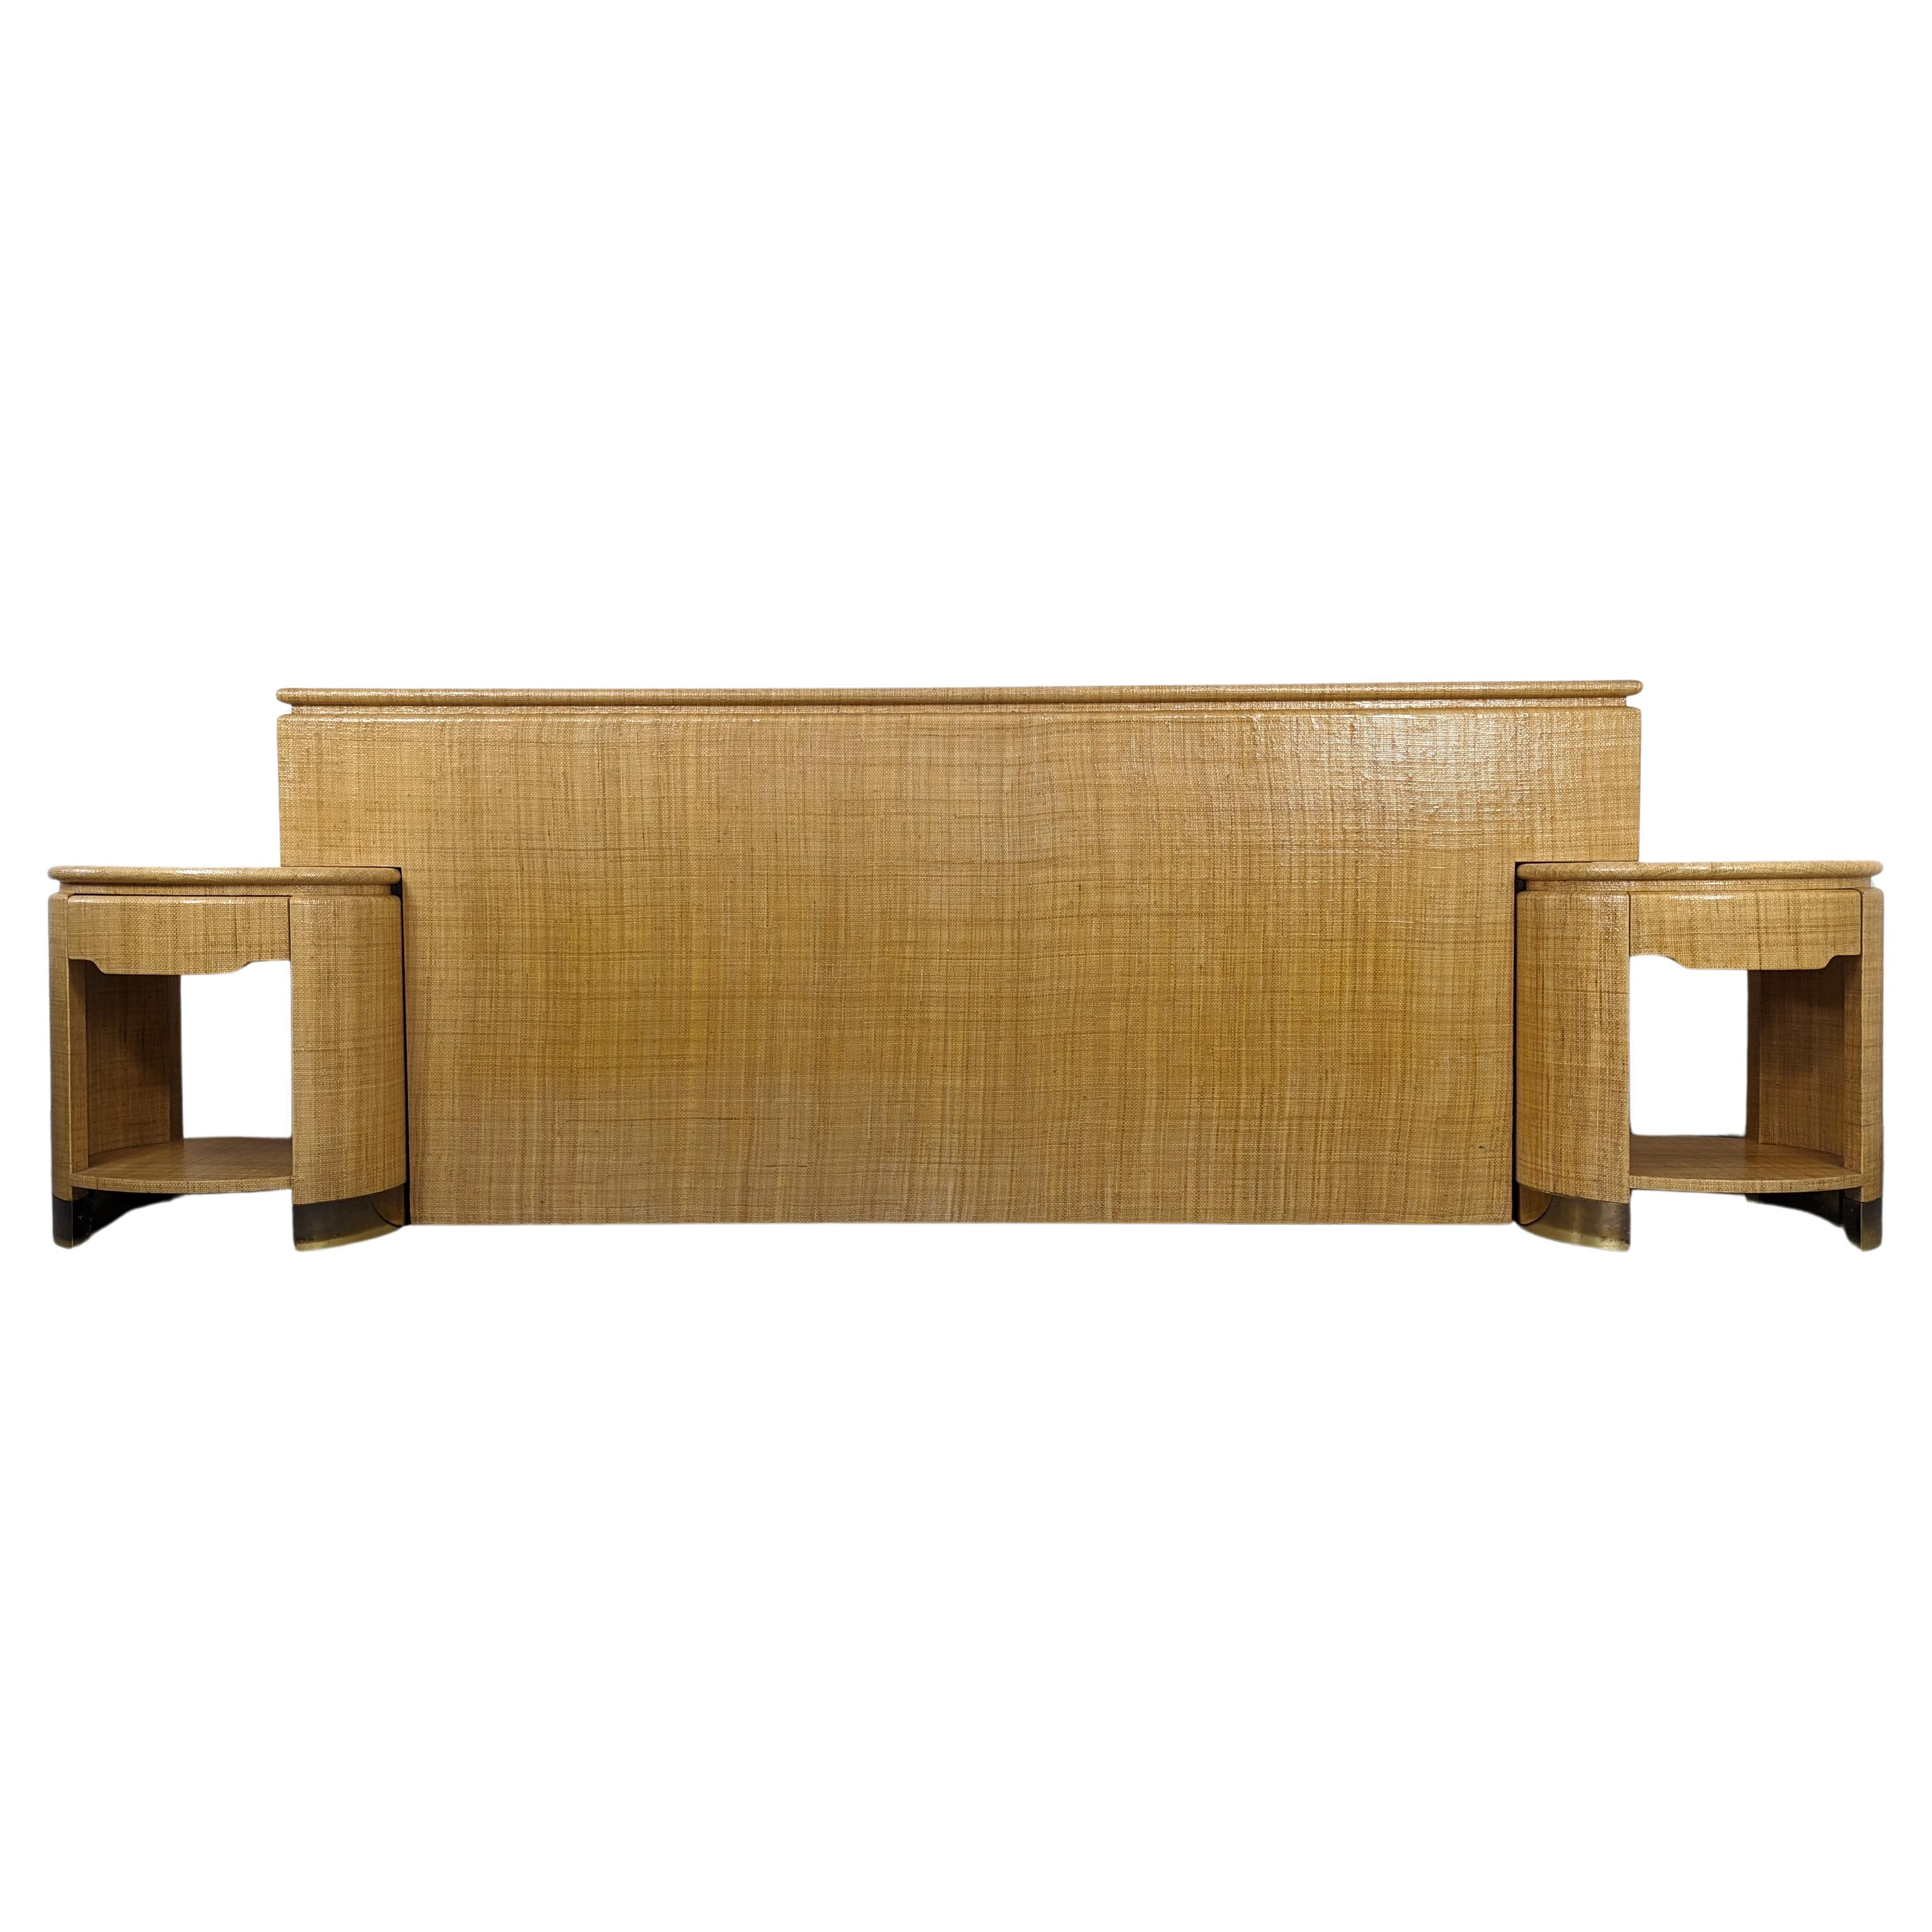 Raffia King Headboard with Matching Nightstands by Harrison Van Horn, c1970s For Sale